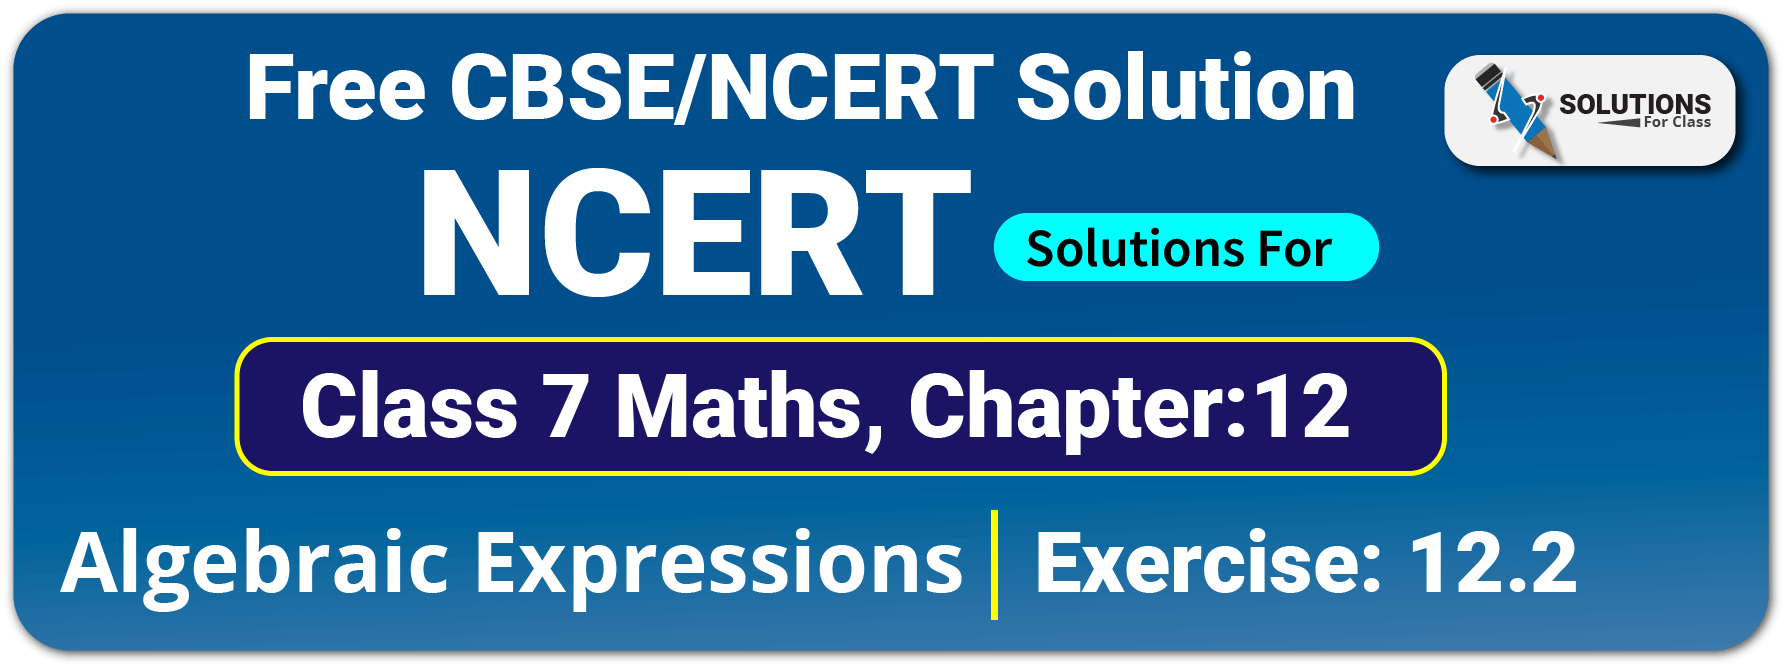 NCERT Solutions For Class 7 Maths Chapter 12 Algebraic Expressions Exercise 12.2